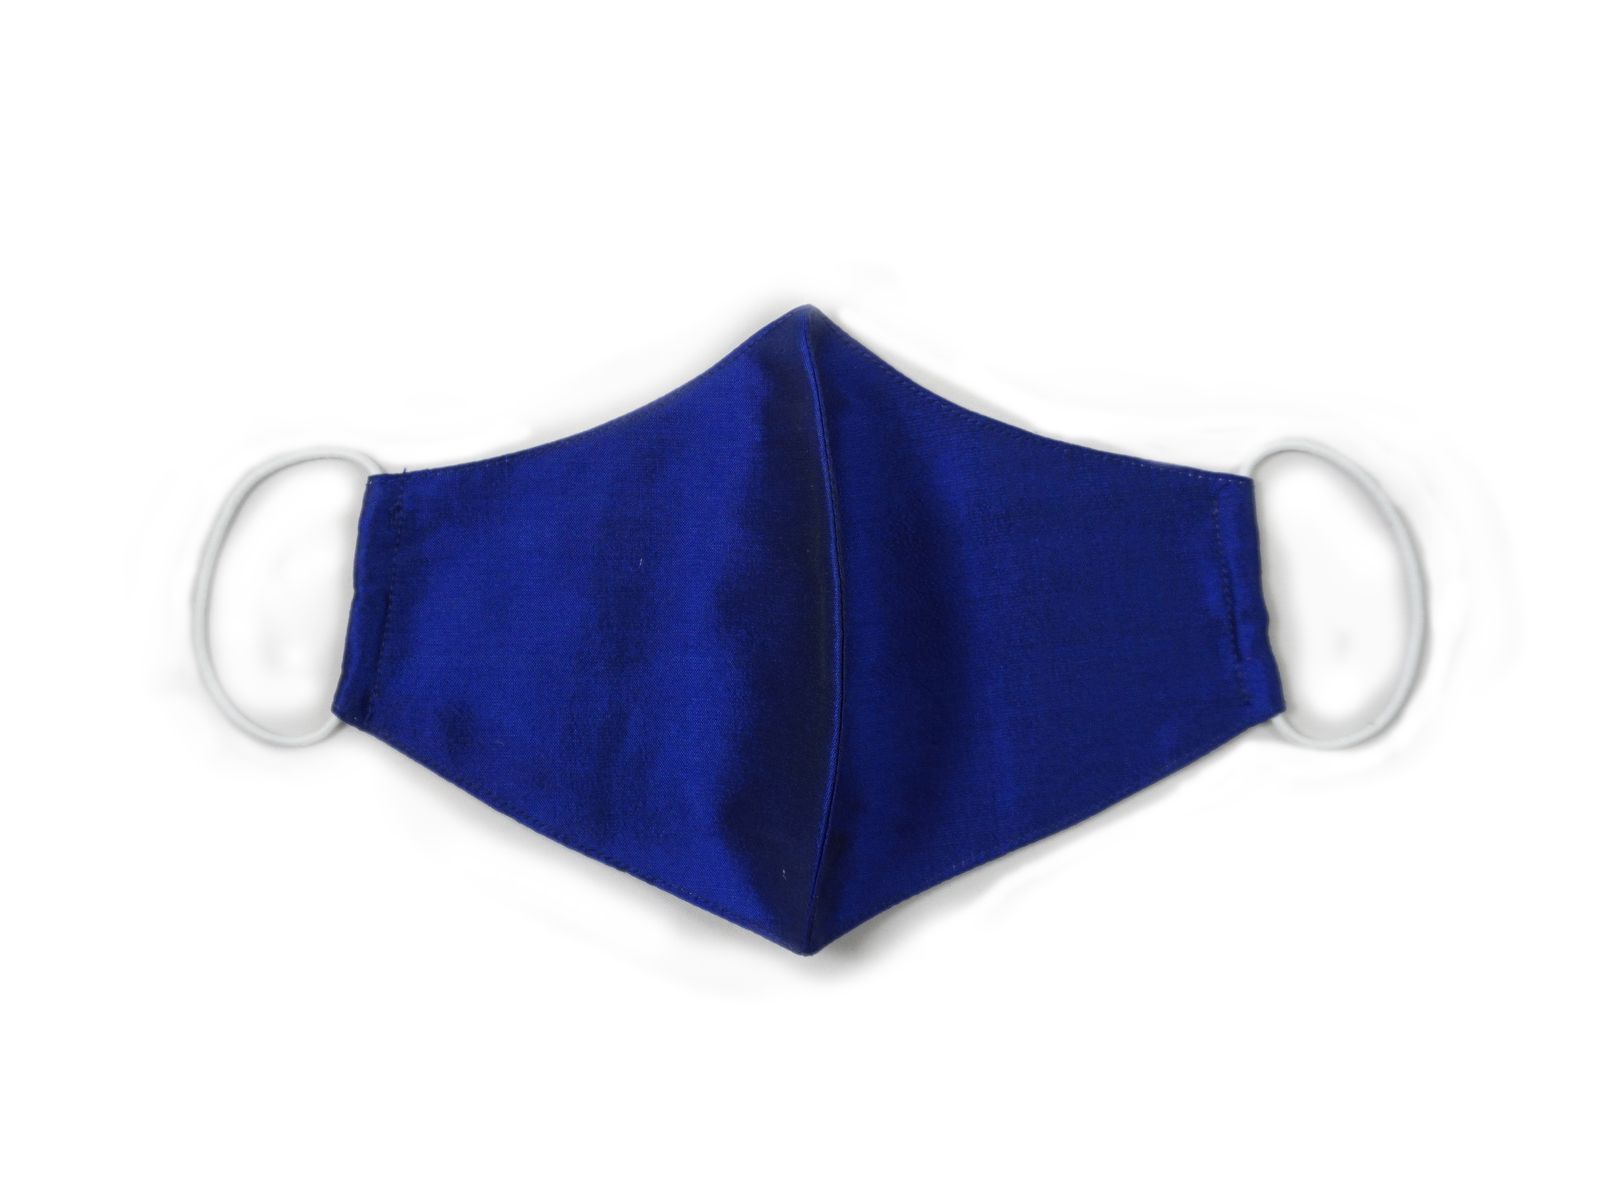 Blue silk face mask from Cocorose London